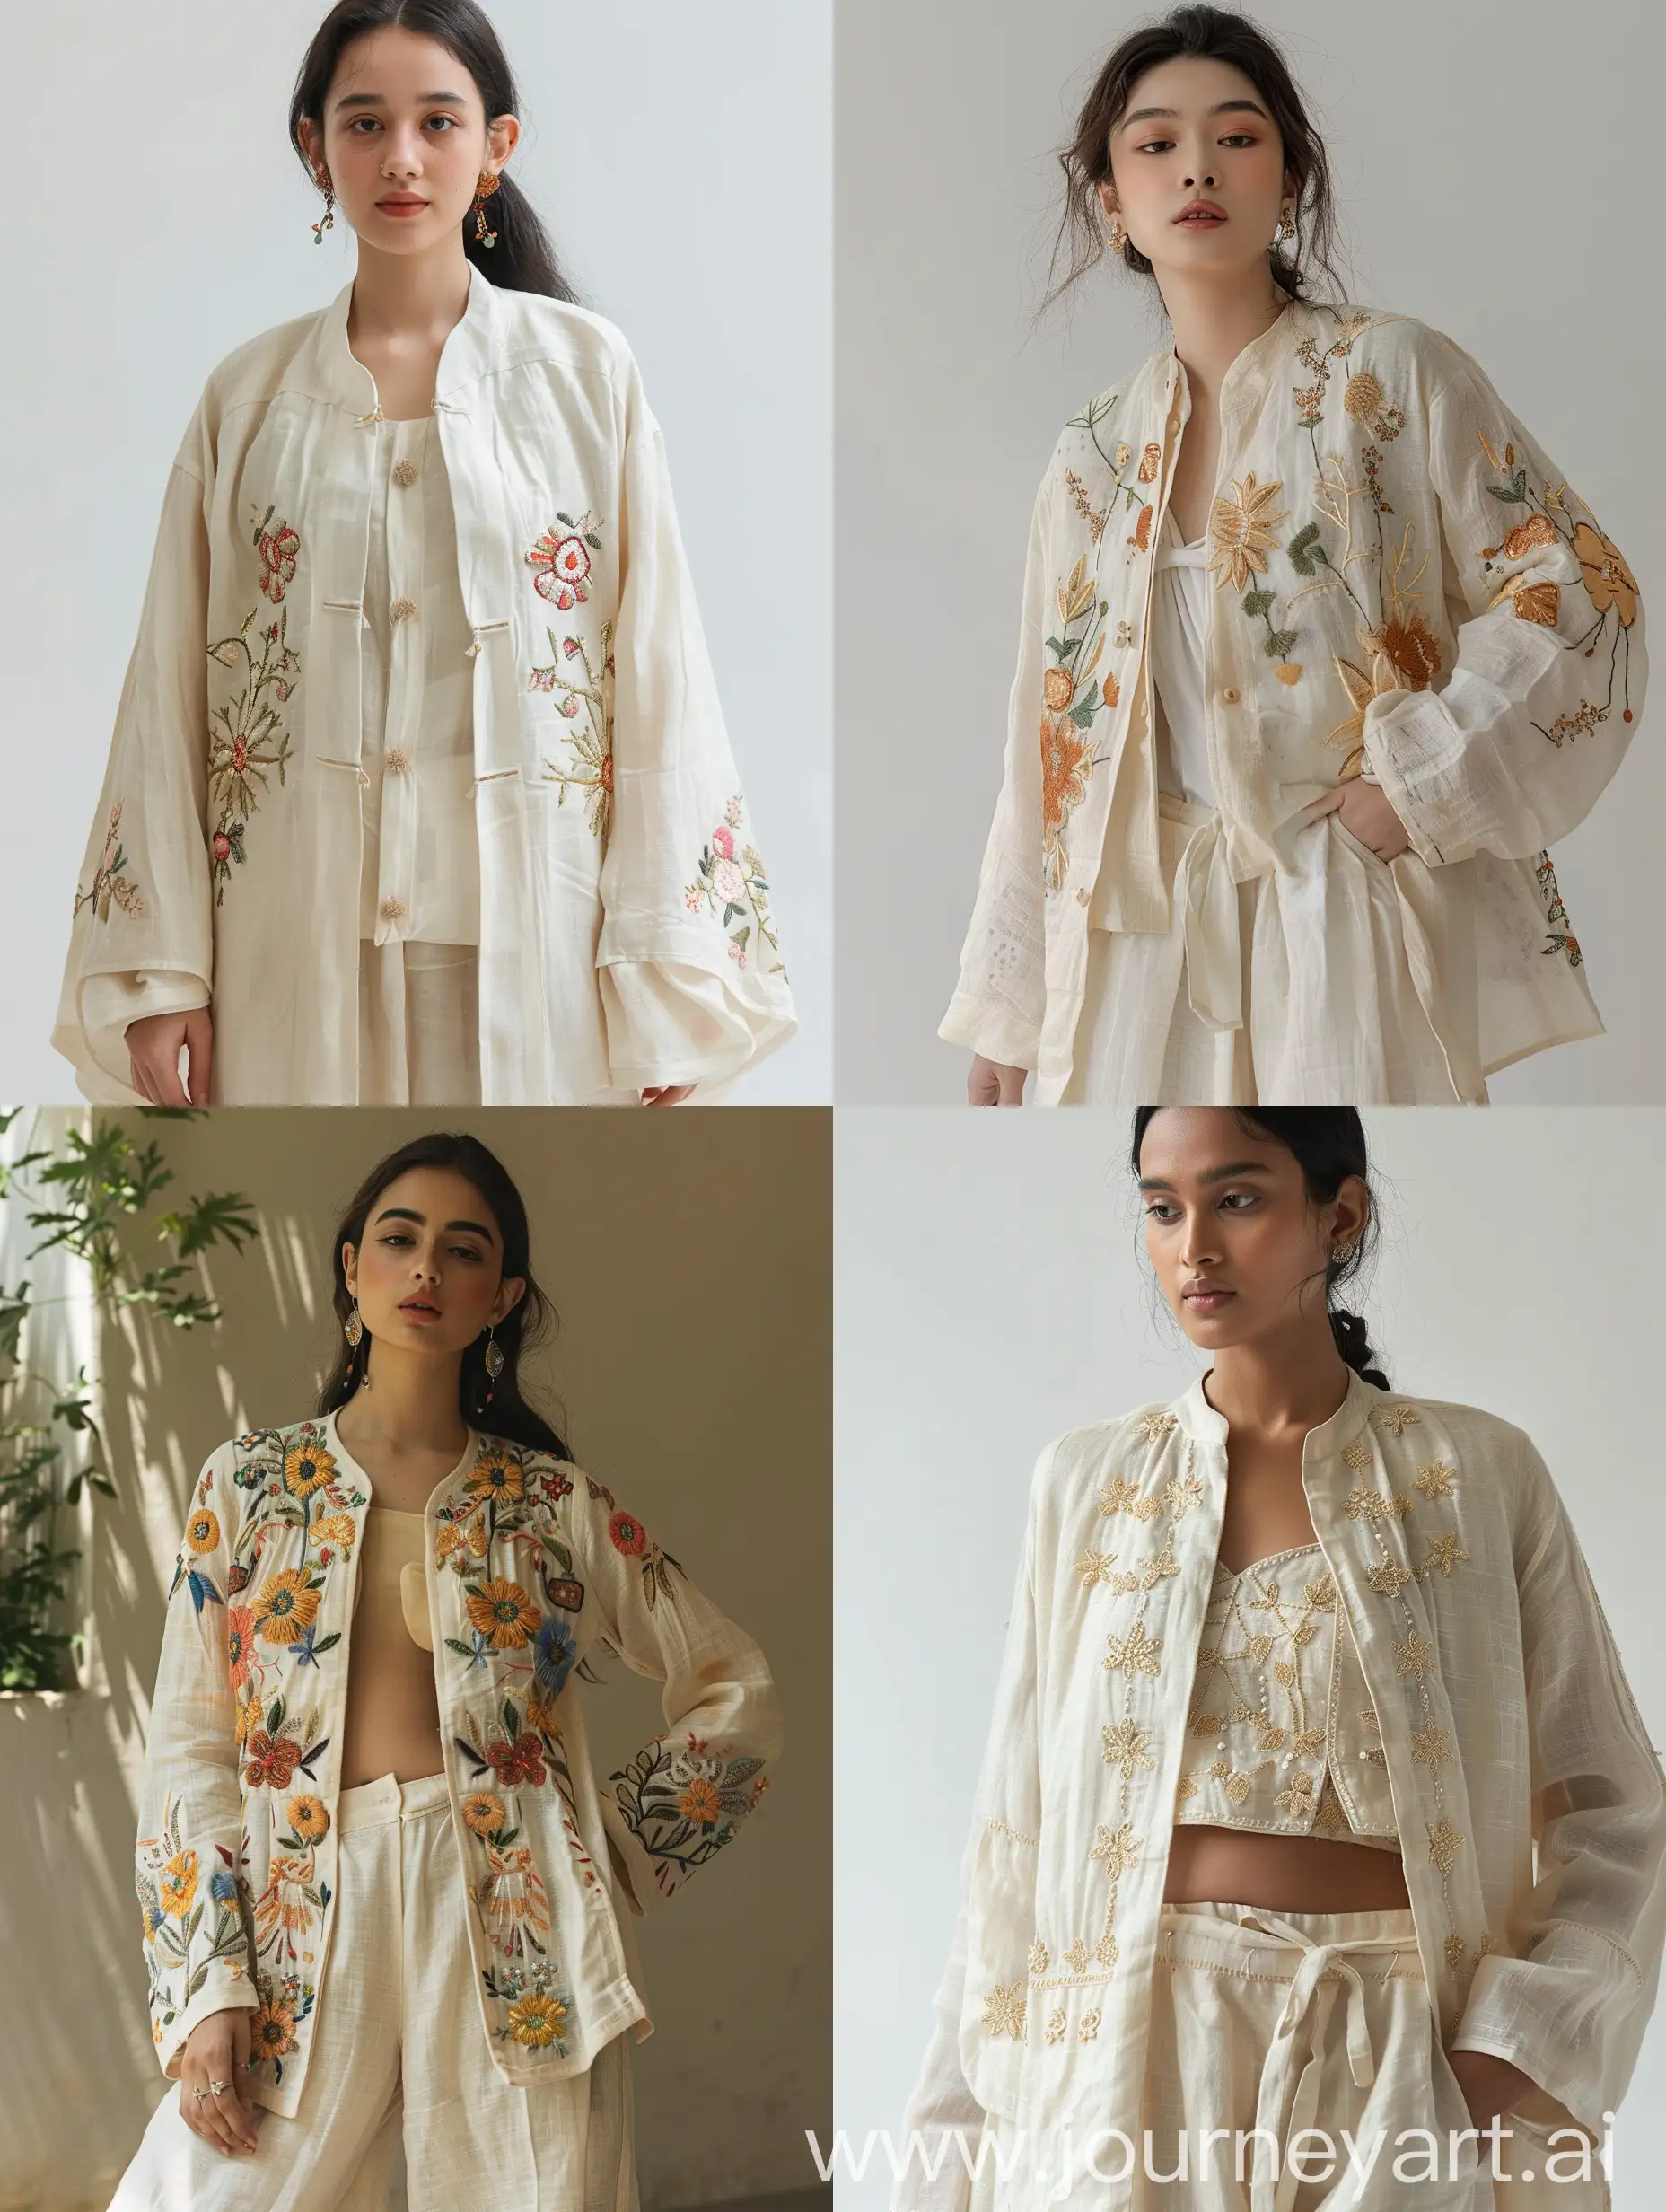 Jacket, handmade embroidery, linen material, with pants, cream color